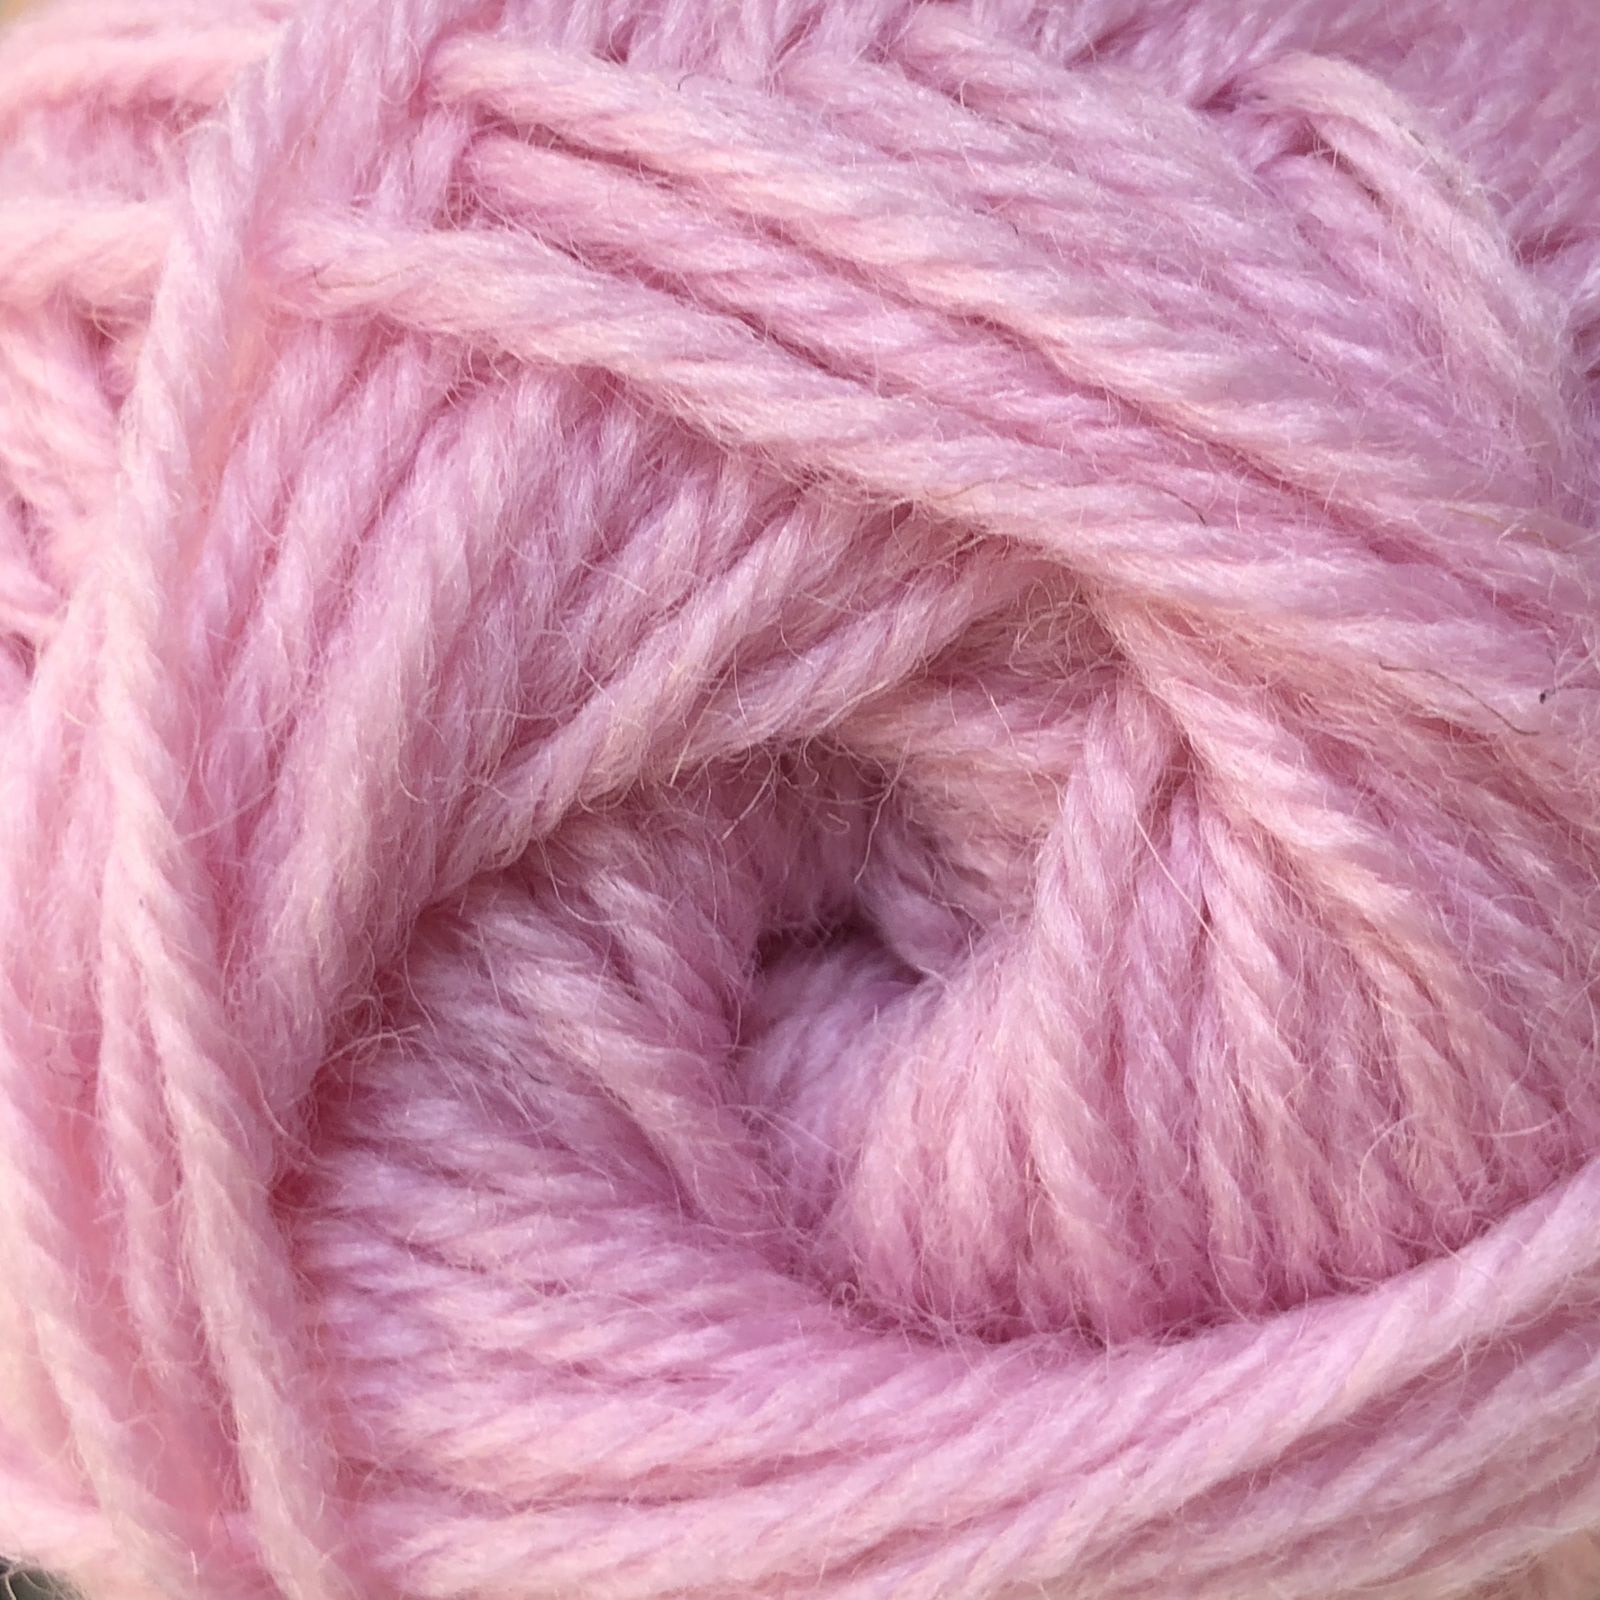 Countrywide Windsor 100% New Zealand wool yarn 8ply 8 ply double knit dk Baby Pink Shade 61